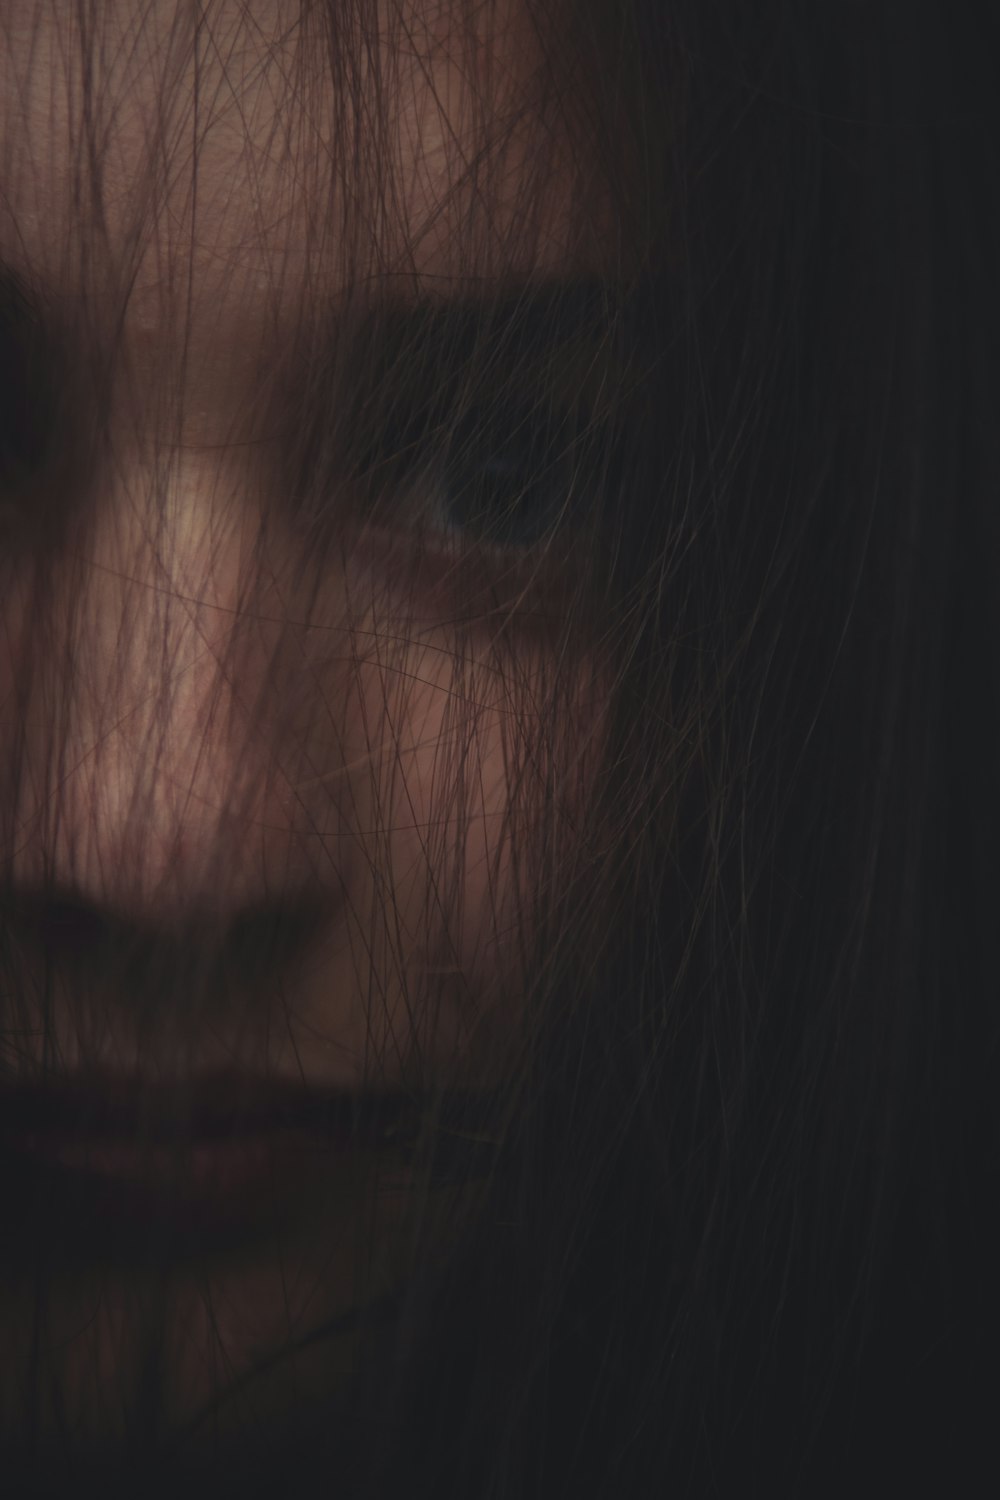 a close up of a person's face with long hair